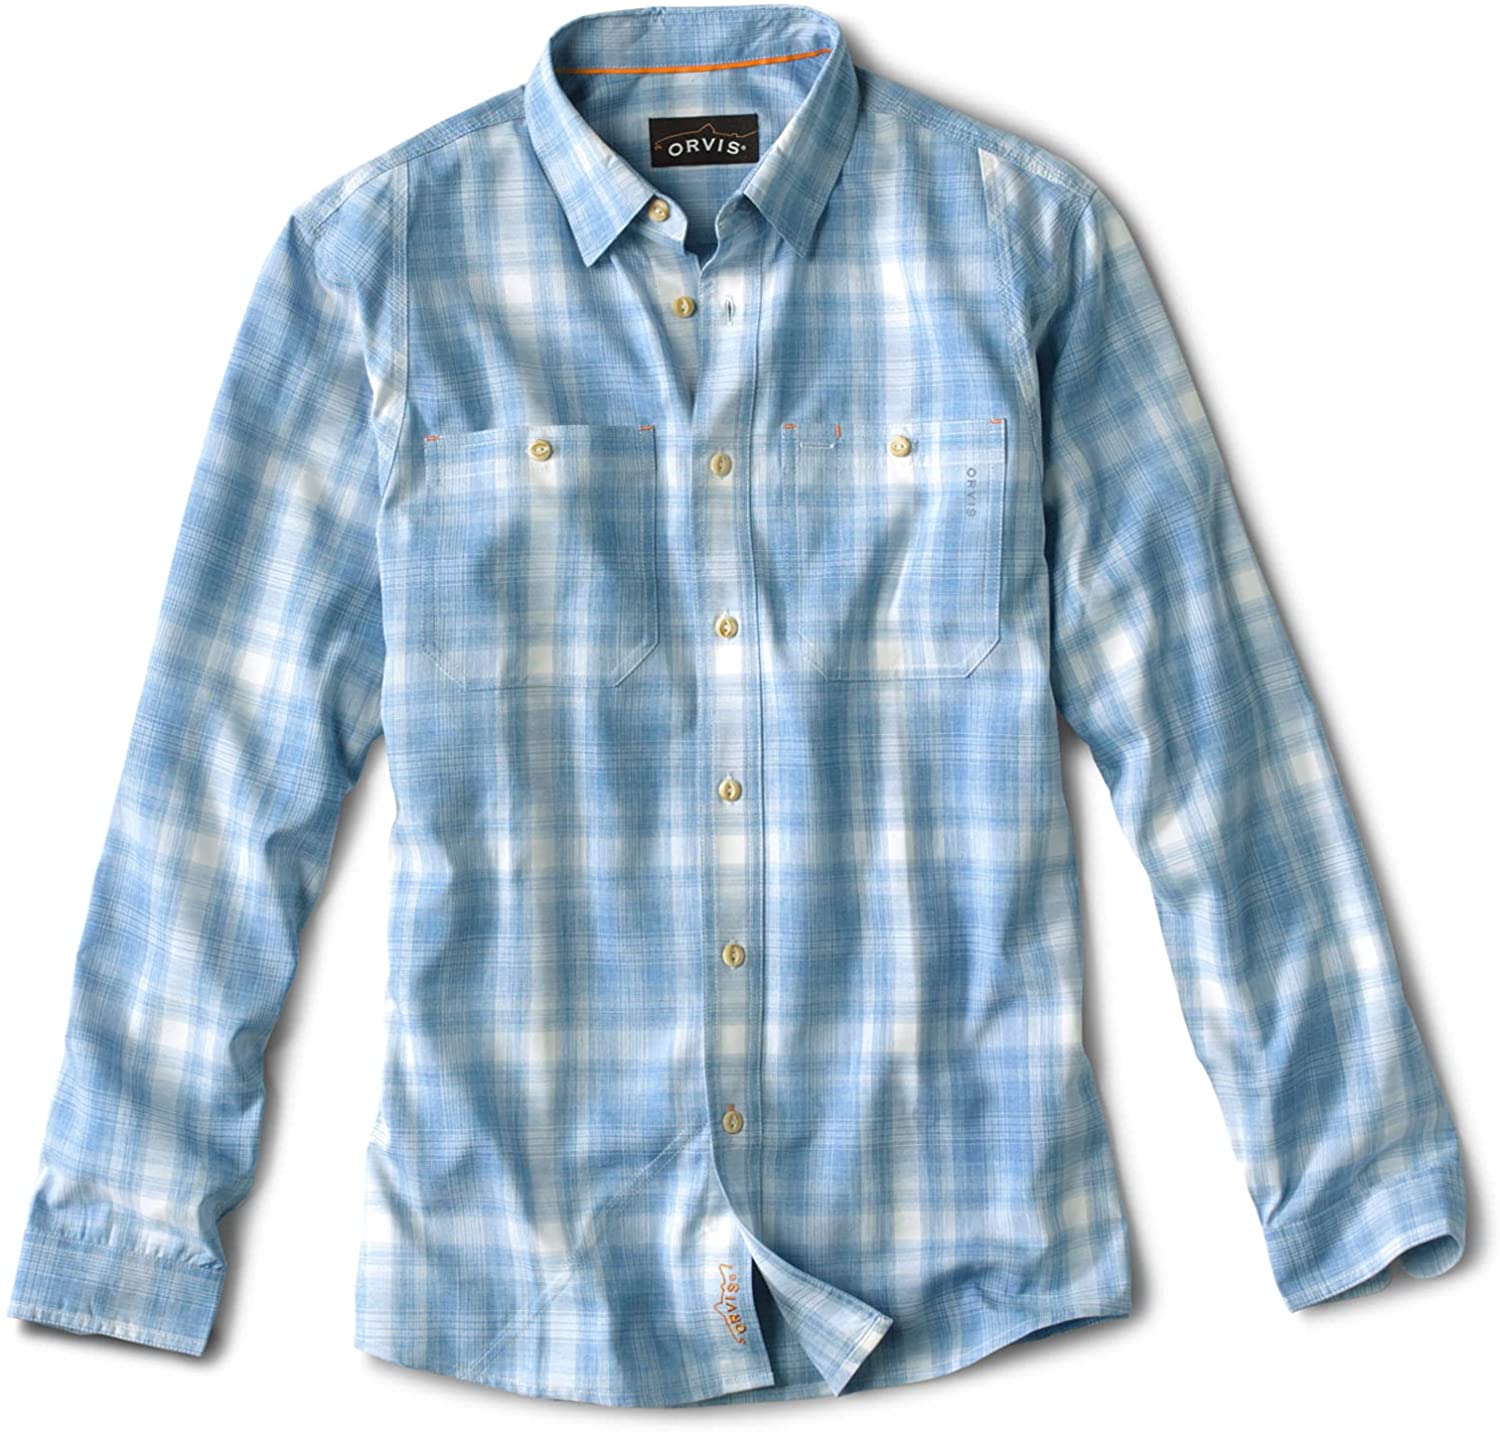 Tech Chambray Plaid Workshirt in Mediumblue from front view